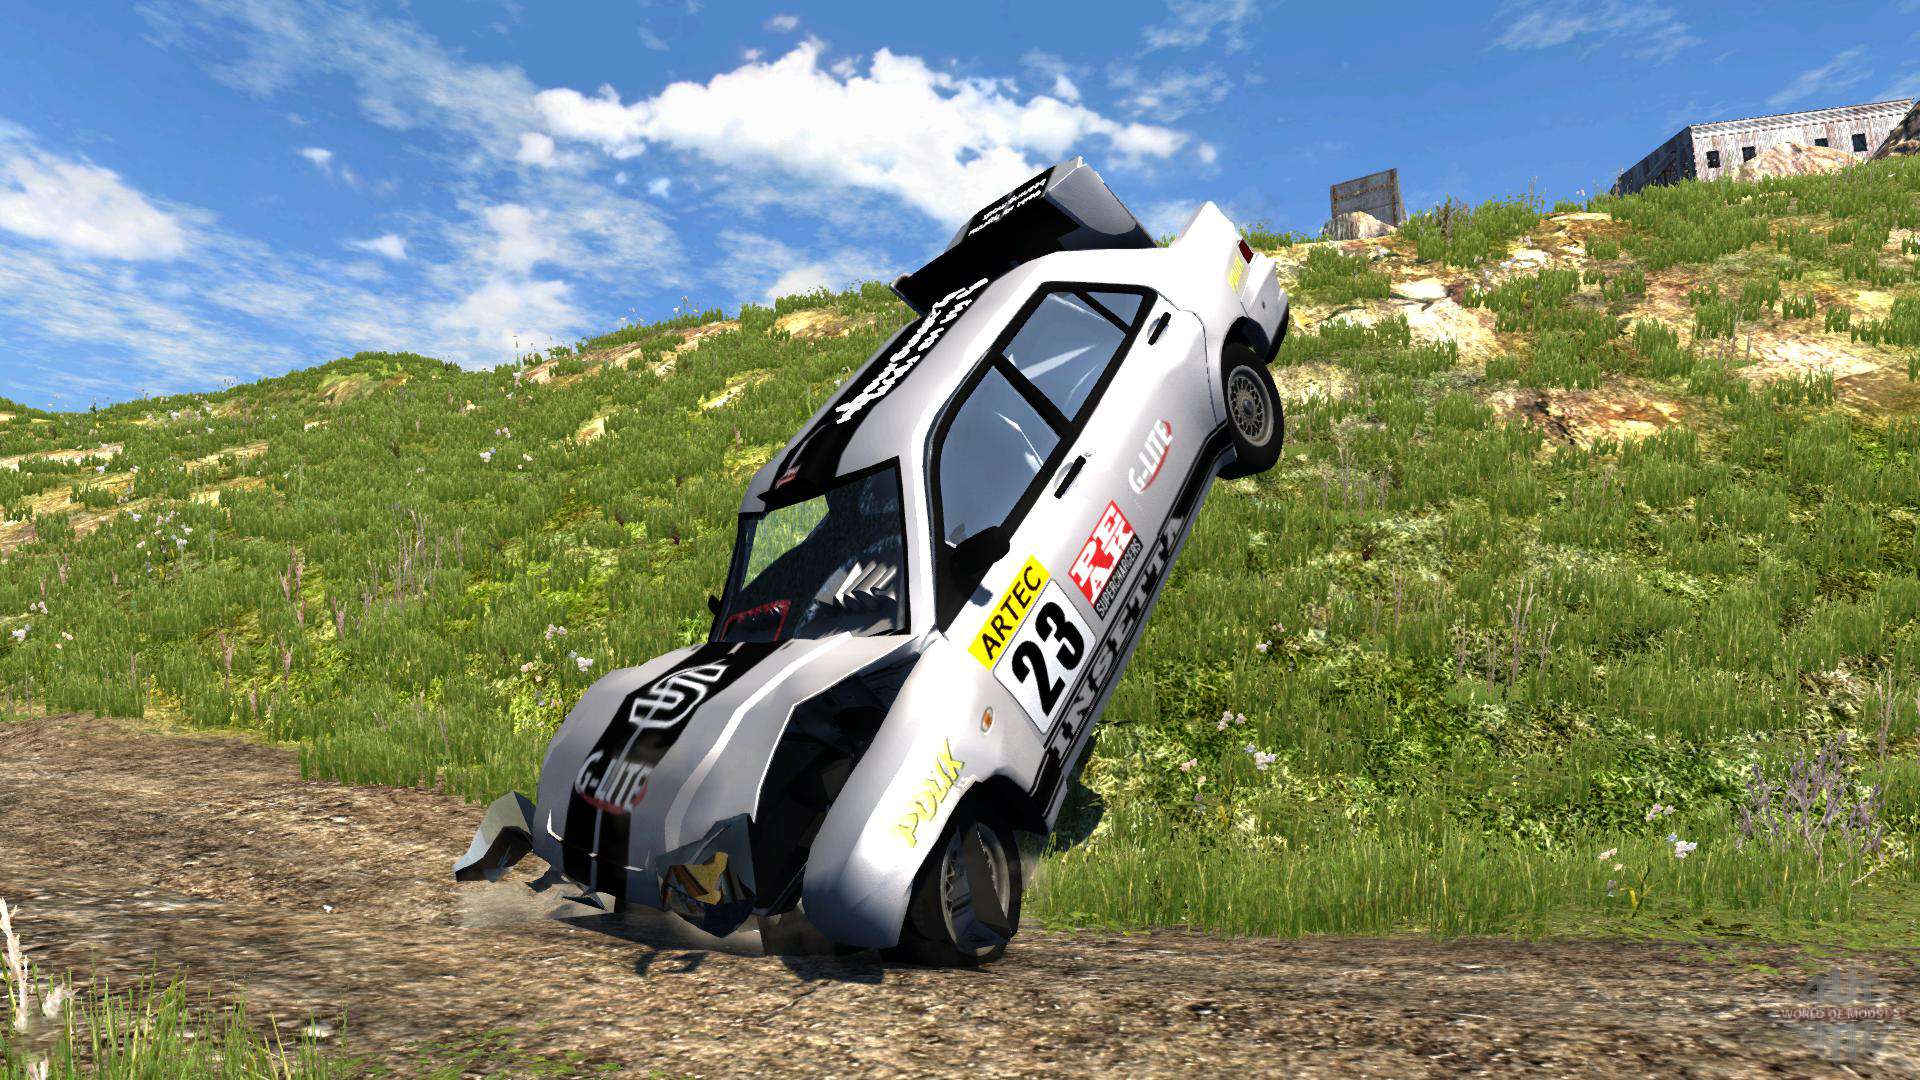 BeamNG.drive Update v0.19 Adds New Vehicles and More, Full Patch Notes Here